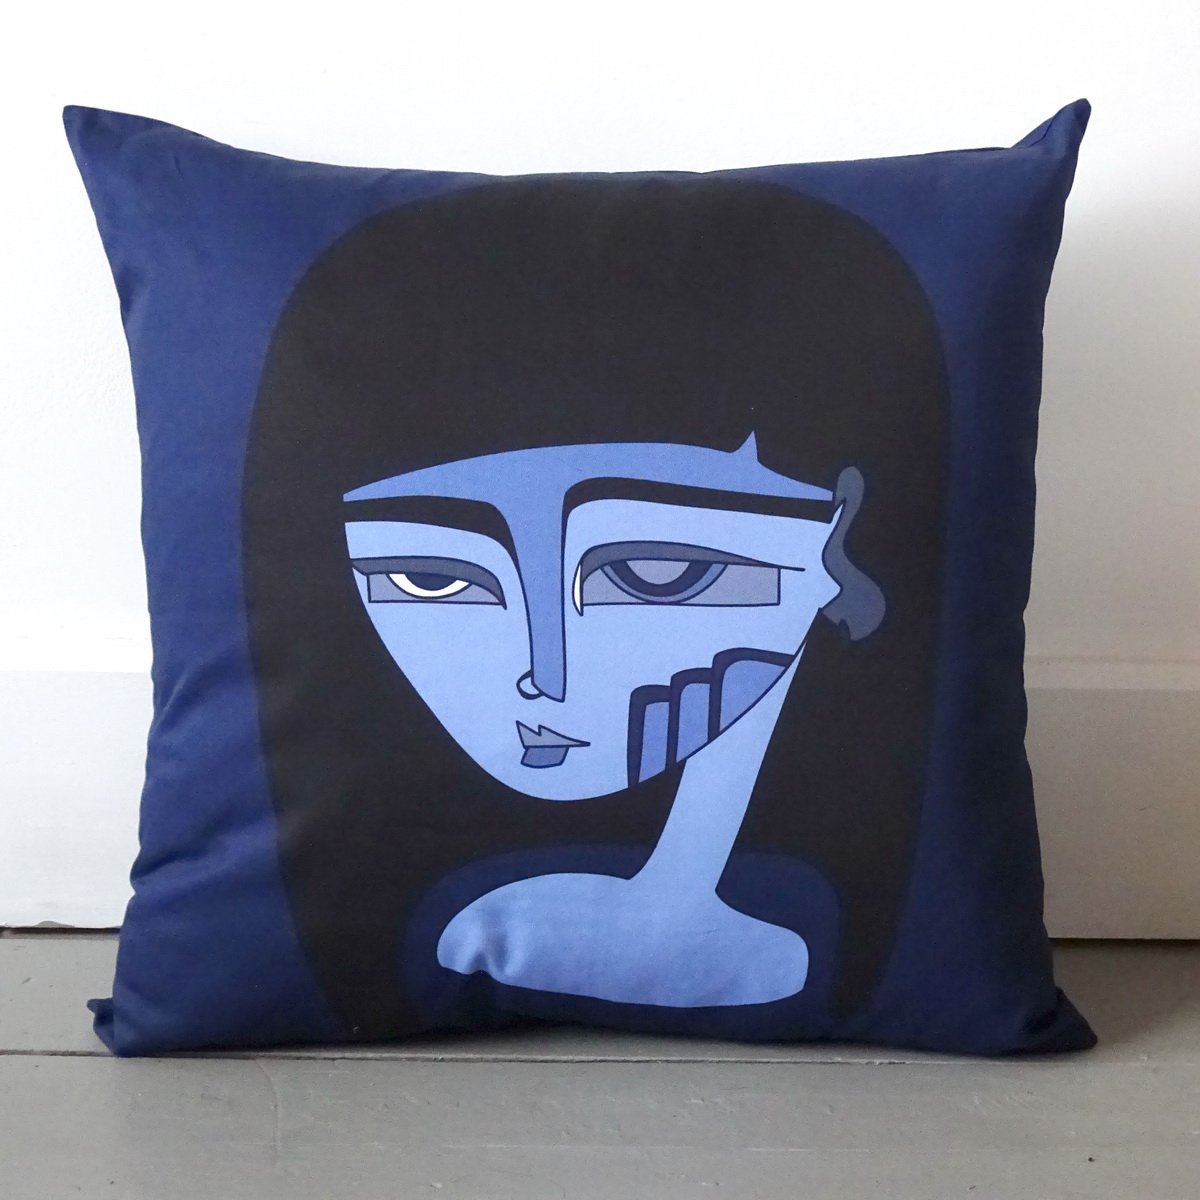 extra large cushion madam X large face in blues with black hair. 100% cotton light twill wicked imp designs